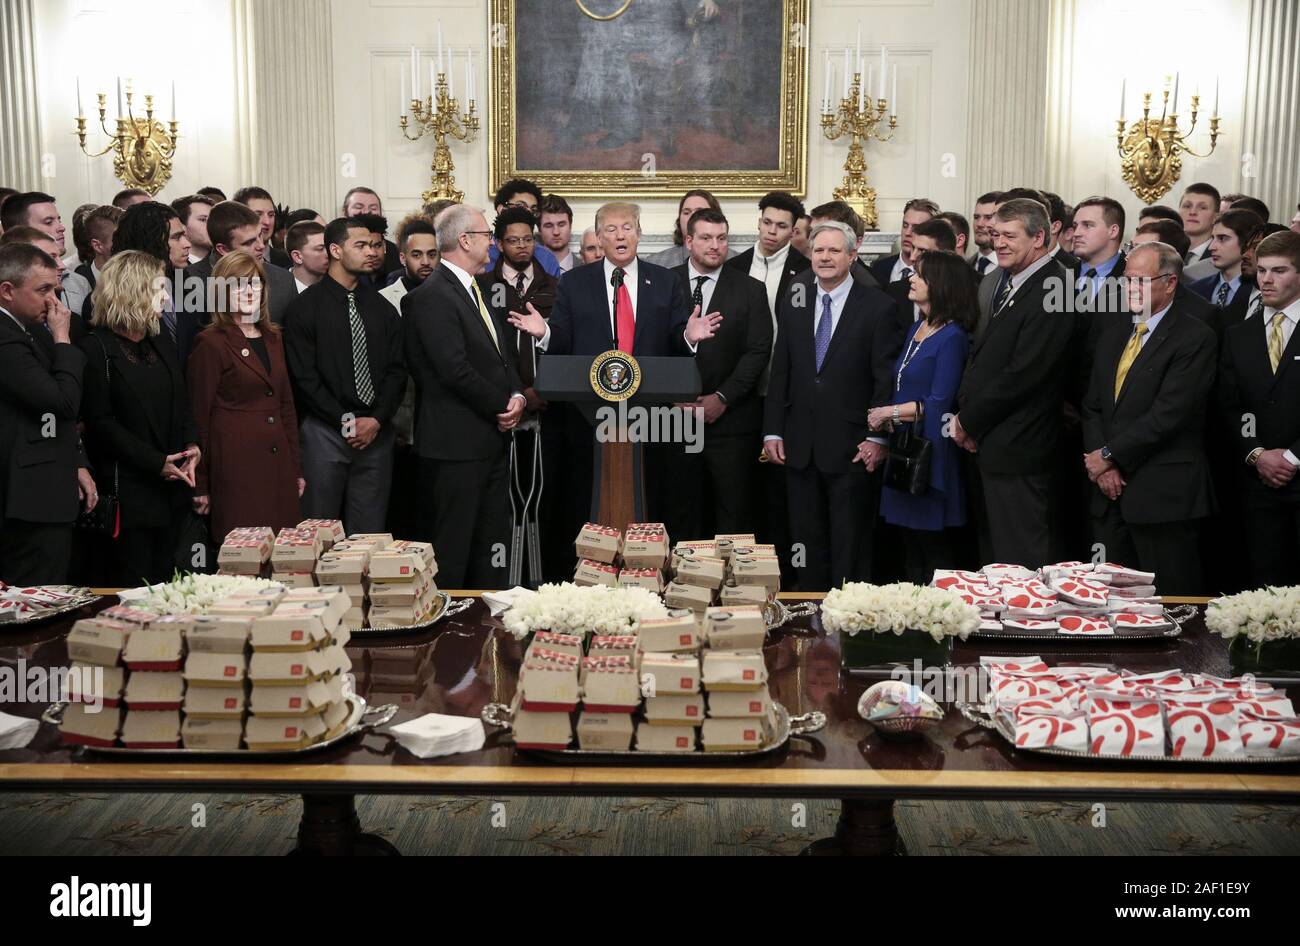 Washington, United States. 12th Dec, 2019. U.S. President Donald Trump participates in a photo opportunity with the 2018 Division I FCS National Champions: The North Dakota State Bison in the State Dining Room of the White House on March 4, 2019, in Washington, DC Photo by Oliver Contreras/UPI Credit: UPI/Alamy Live News Stock Photo